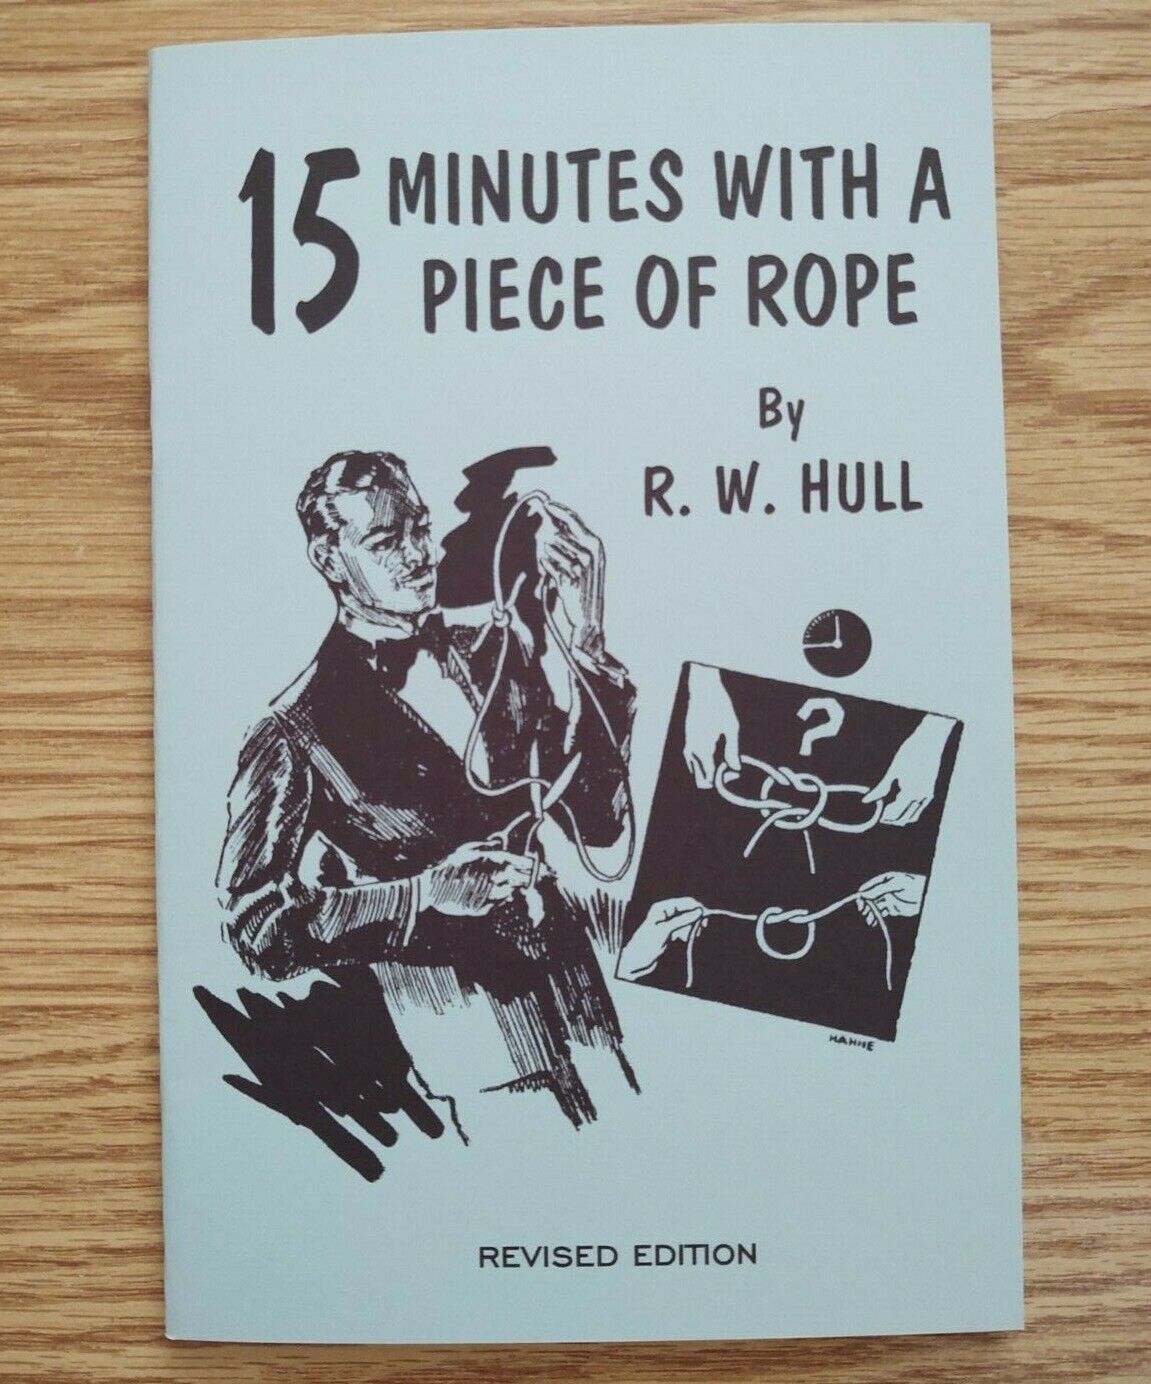 15 Minutes with a Piece of Rope by R. W. Hull (A brilliant rope routine)